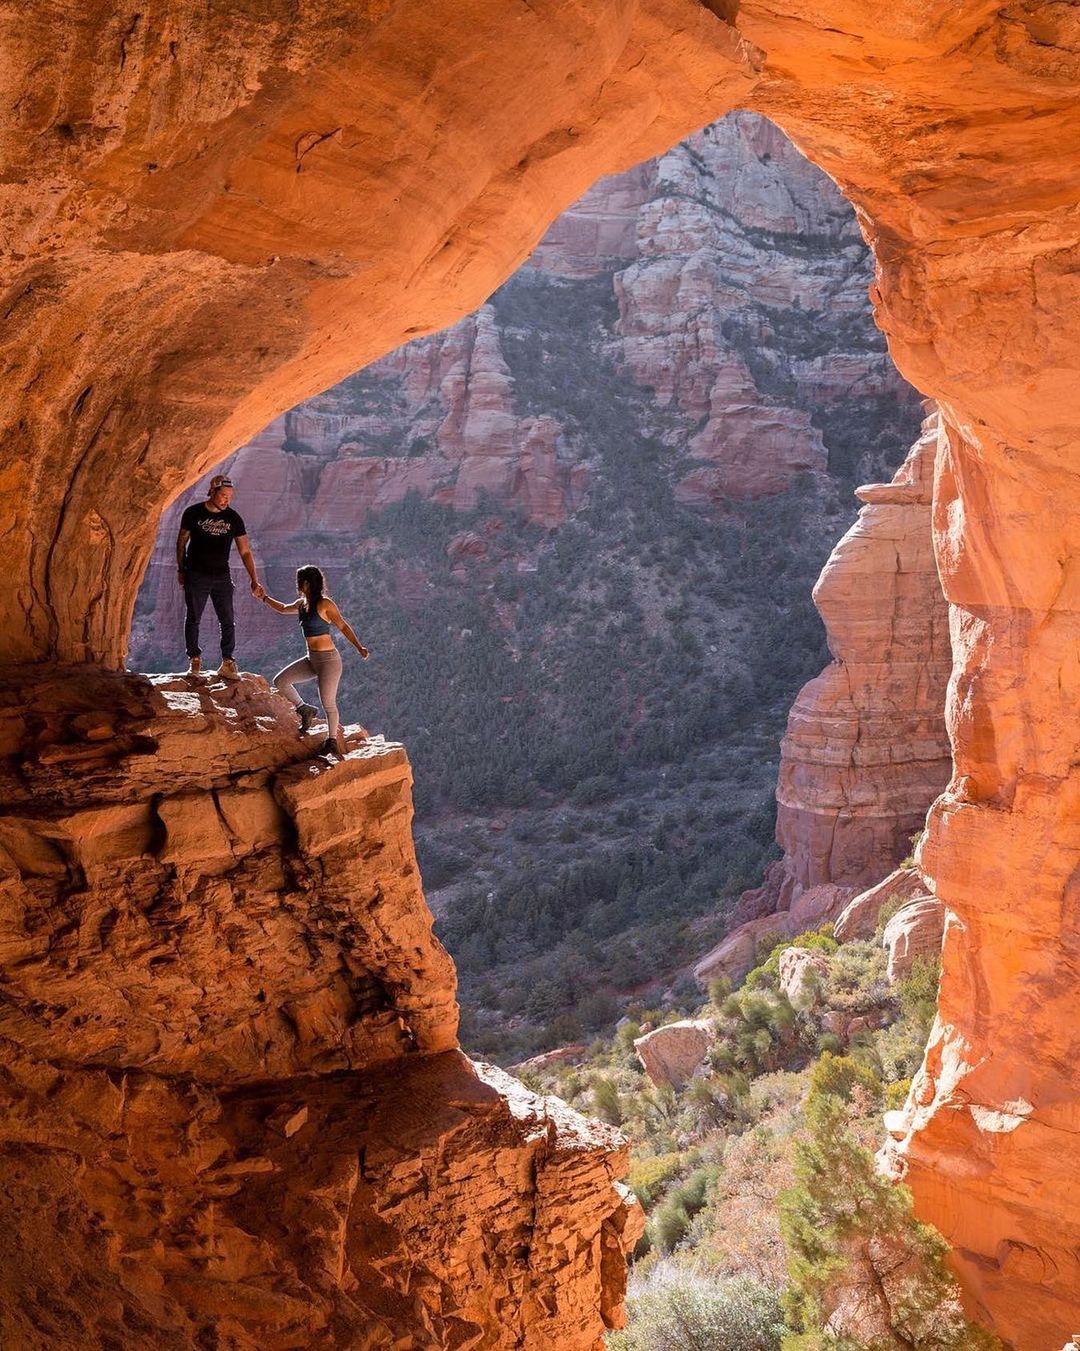 Two people hike in Sedona. Photo by Instagram user @jubel.co.